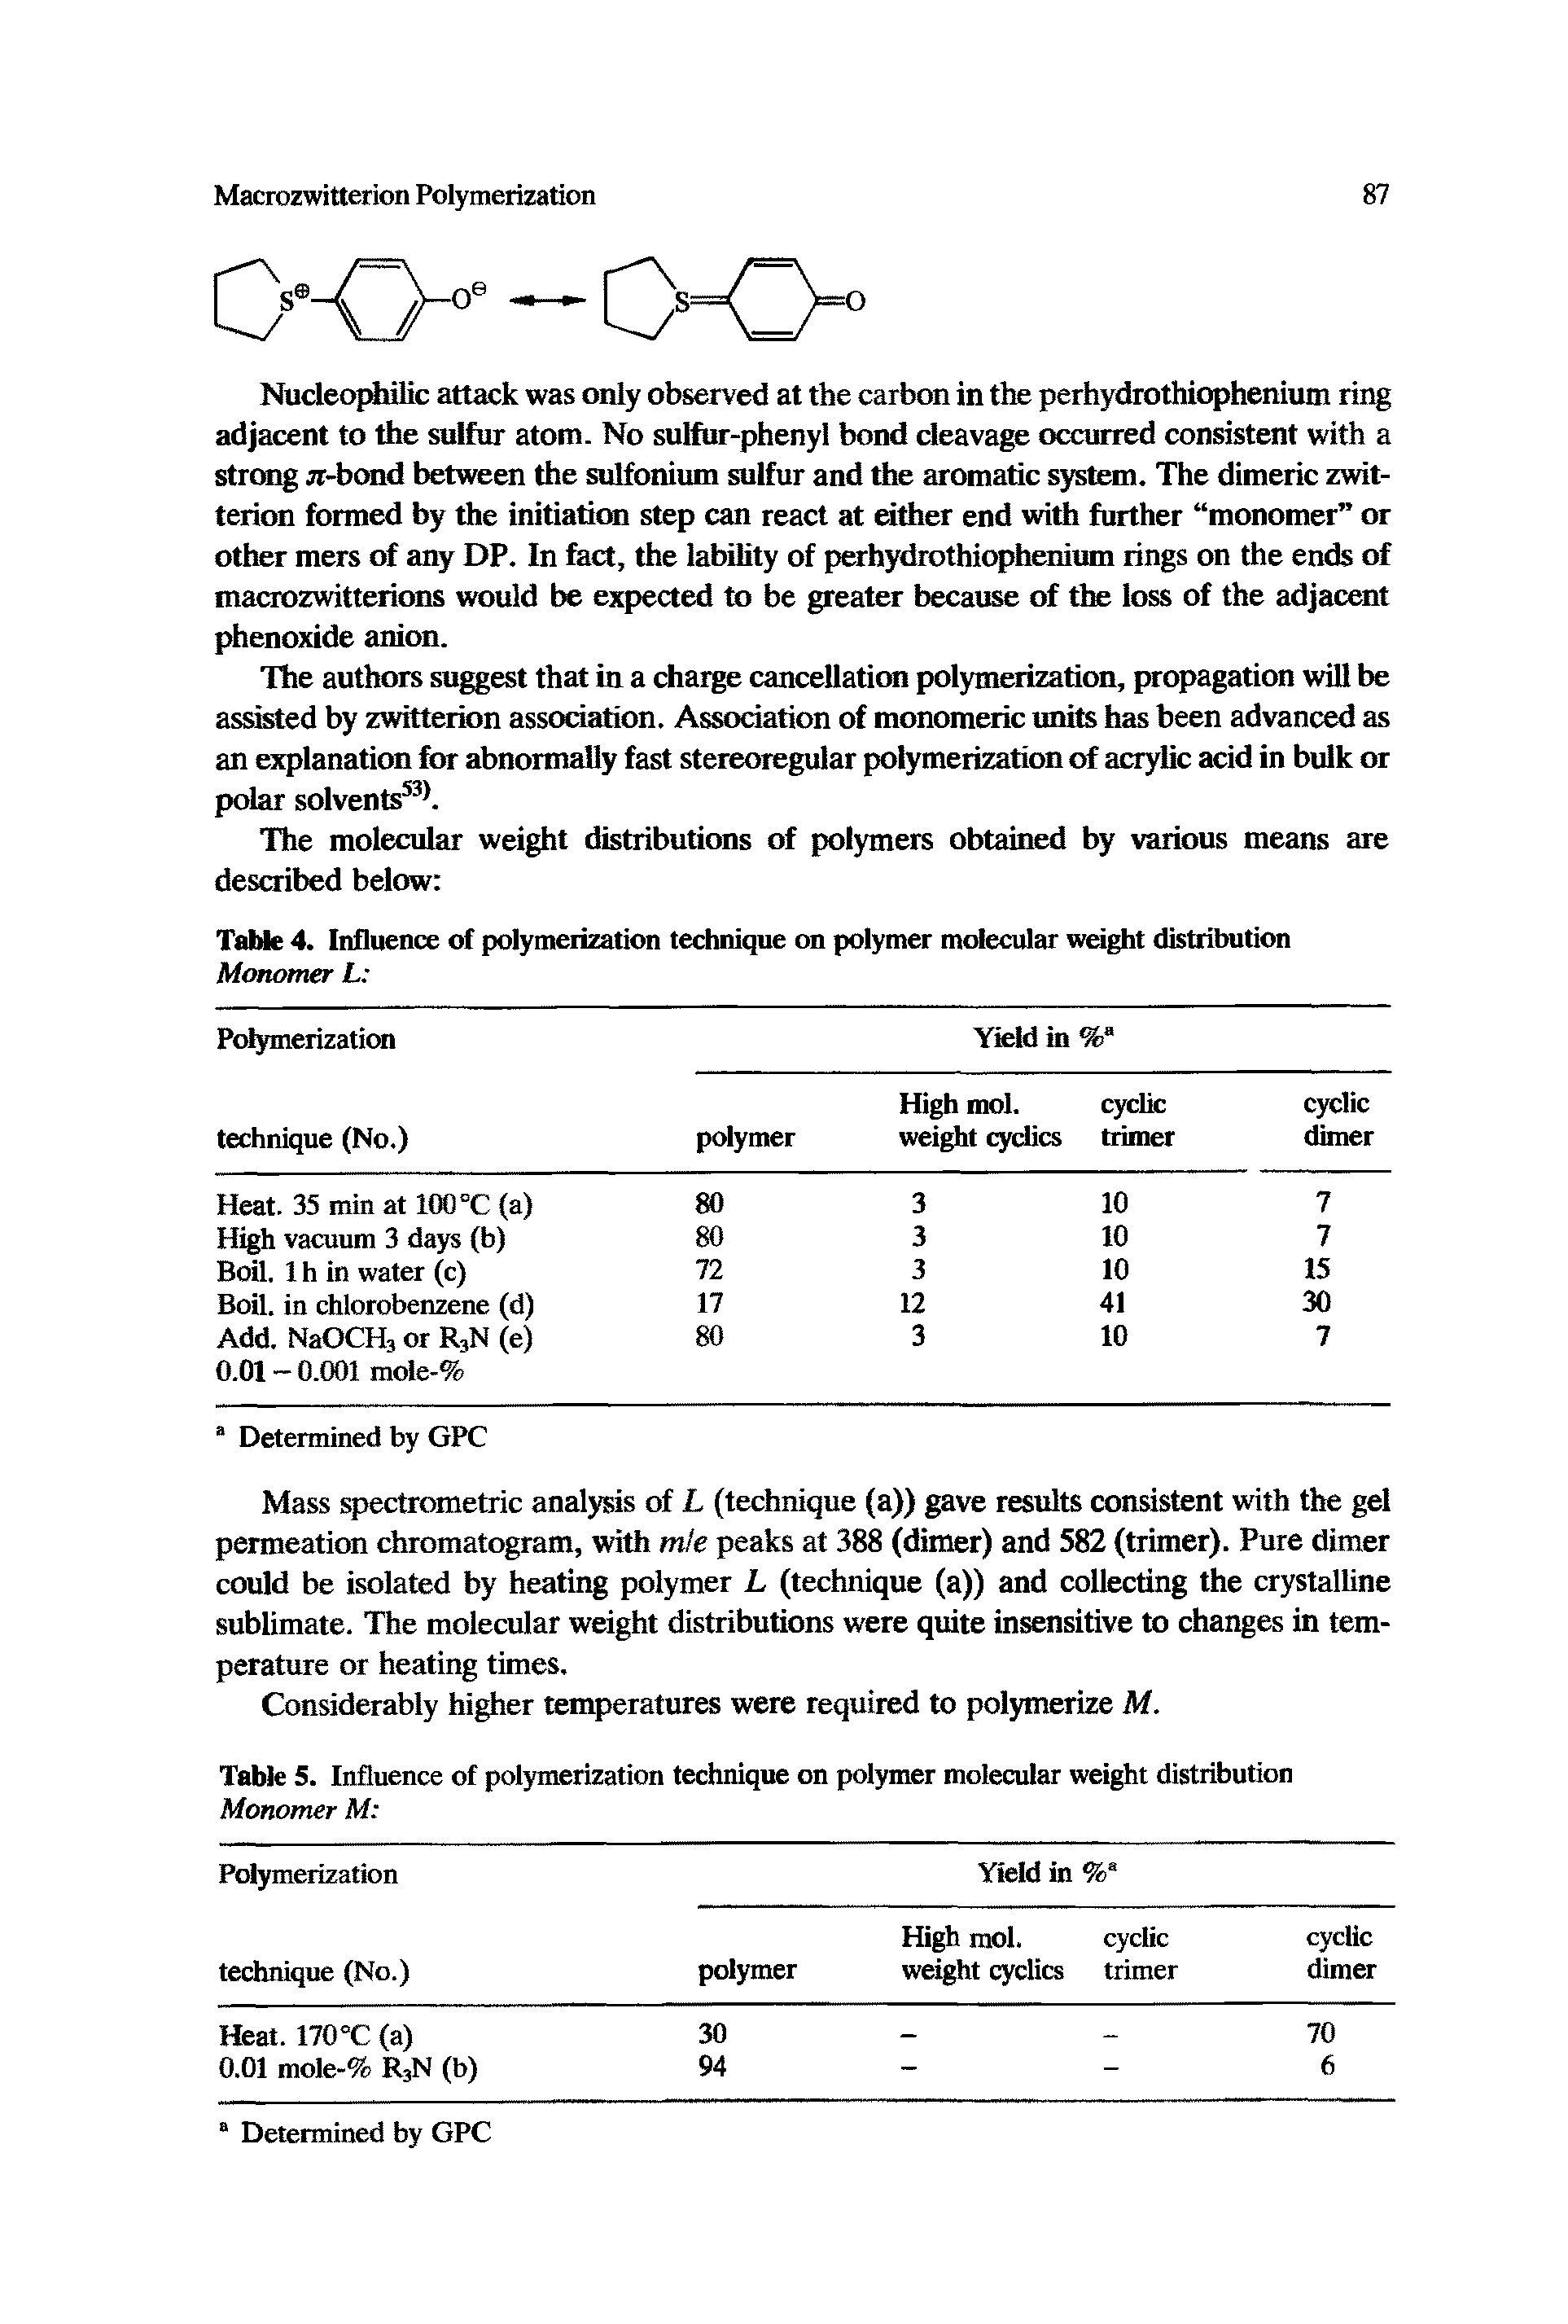 Table 4. Influence of polymerization technique on polymer molecular weight distribution Monomer L ...